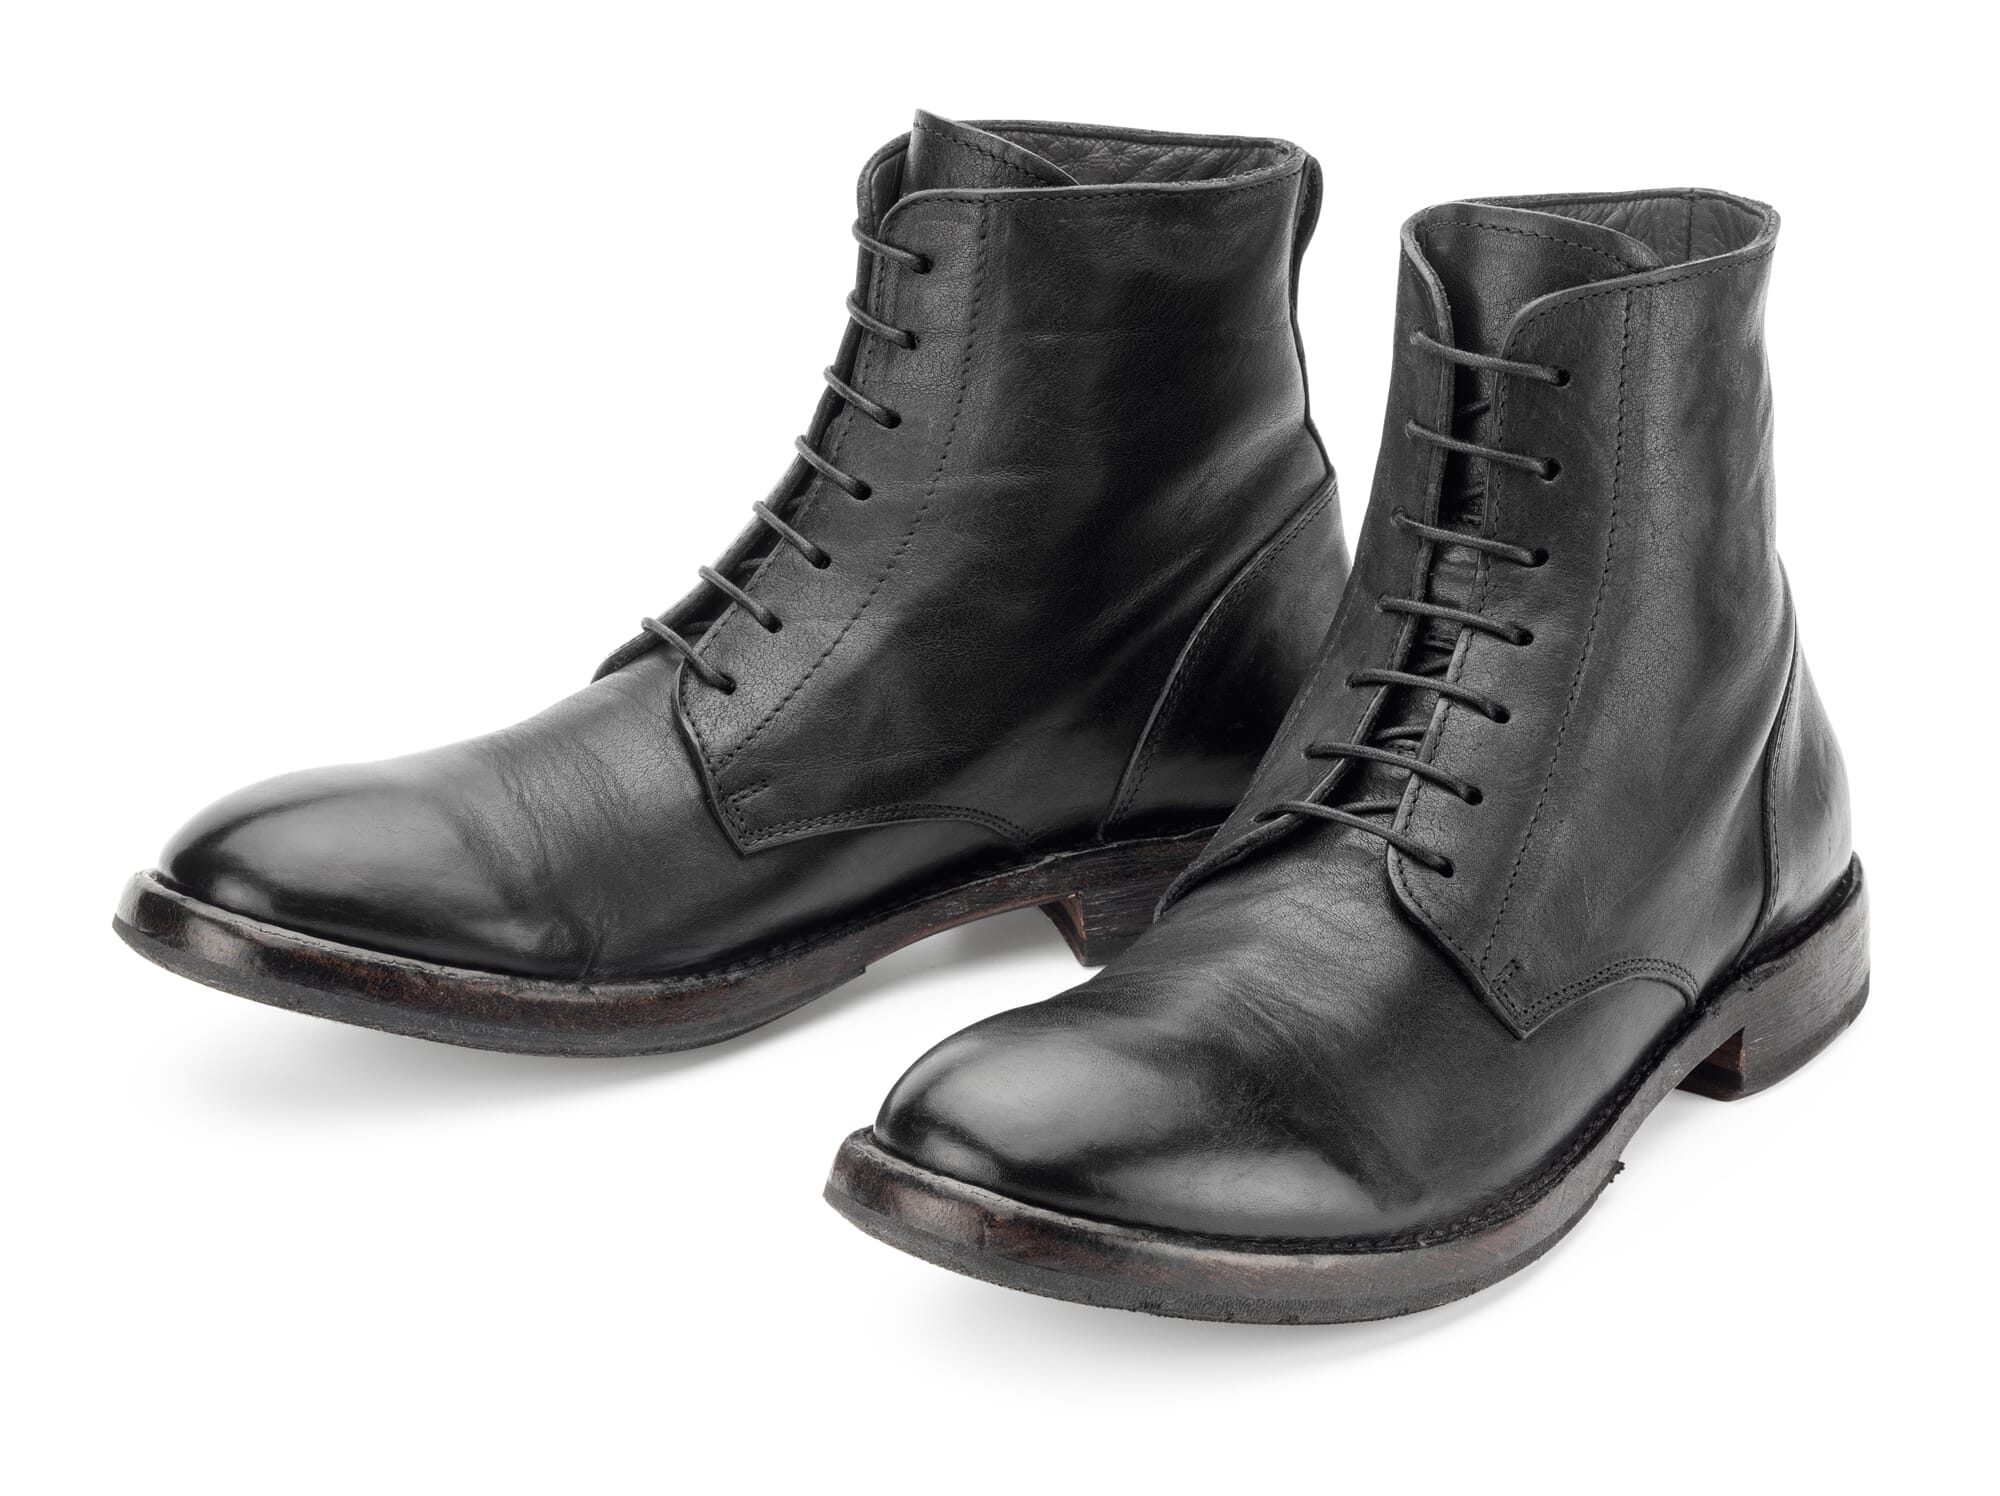 Set up the table work chief Men's Calf Leather Boots, Black | Manufactum